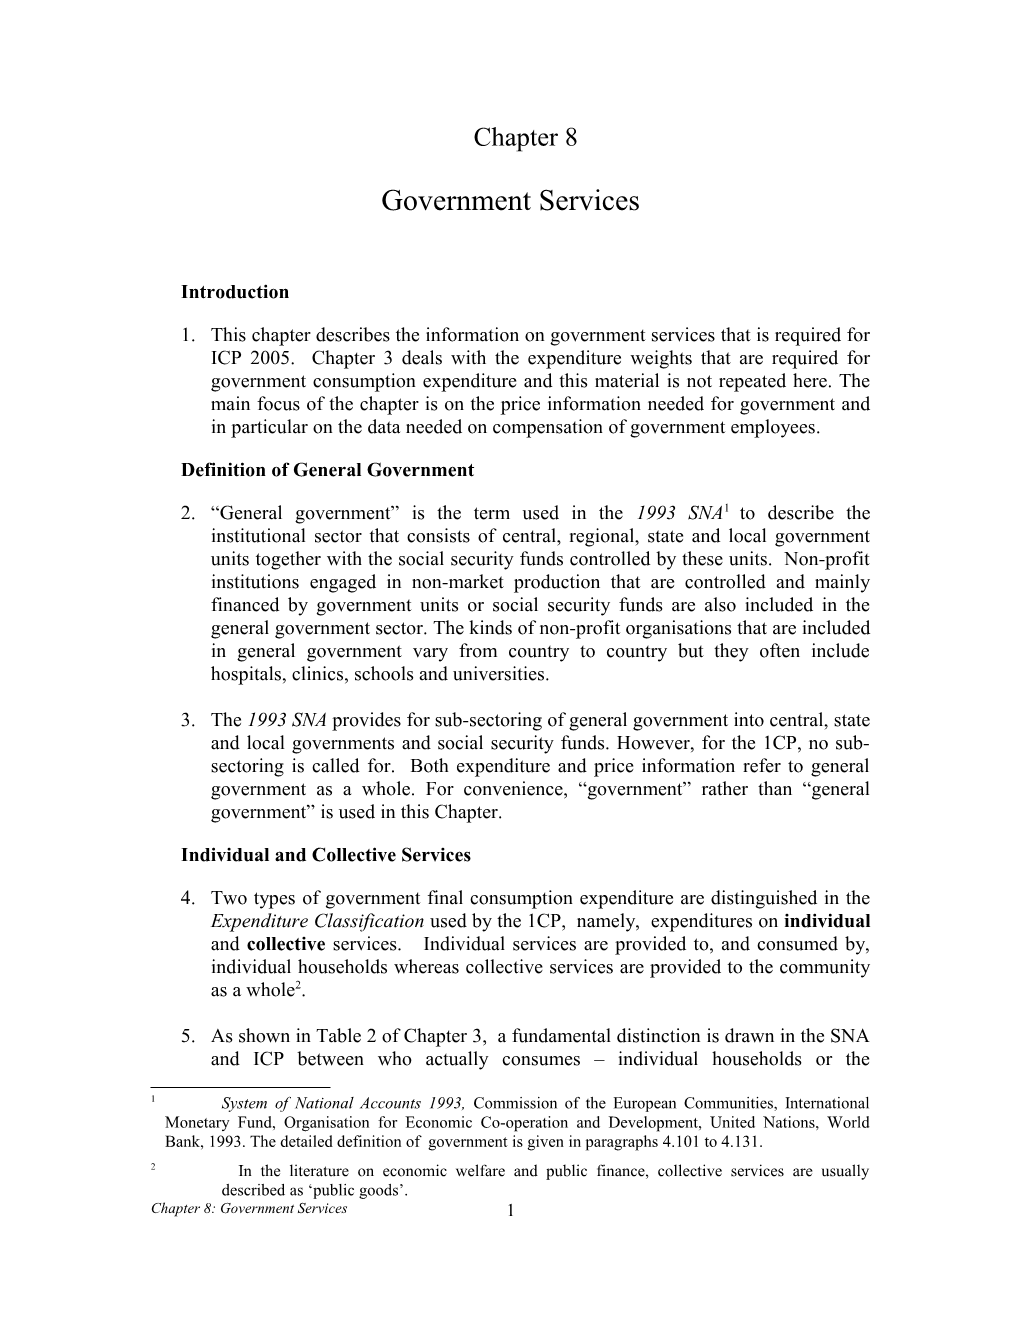 Chapter 8: Government Services